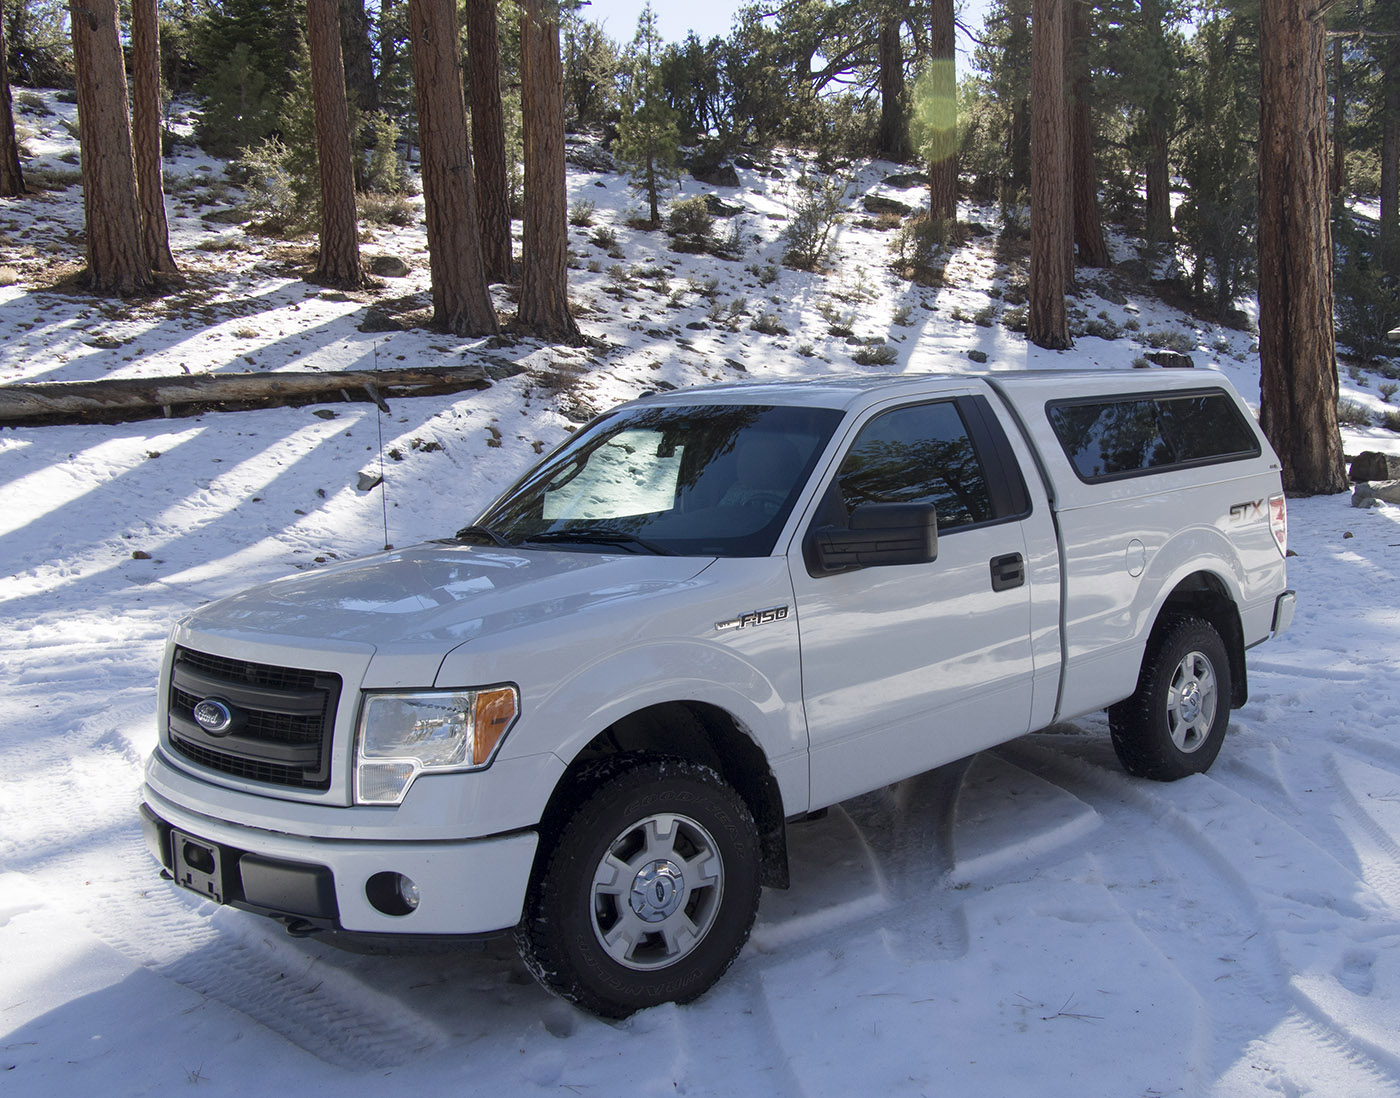 My 4WD F150 in Winter camouflage at Walker Lake trailhead (8355 ft).  I had many opportunities to bond with this fine heavy duty truck with high wheel clearance on my travels in the Sierra Nevada and Death Valley.